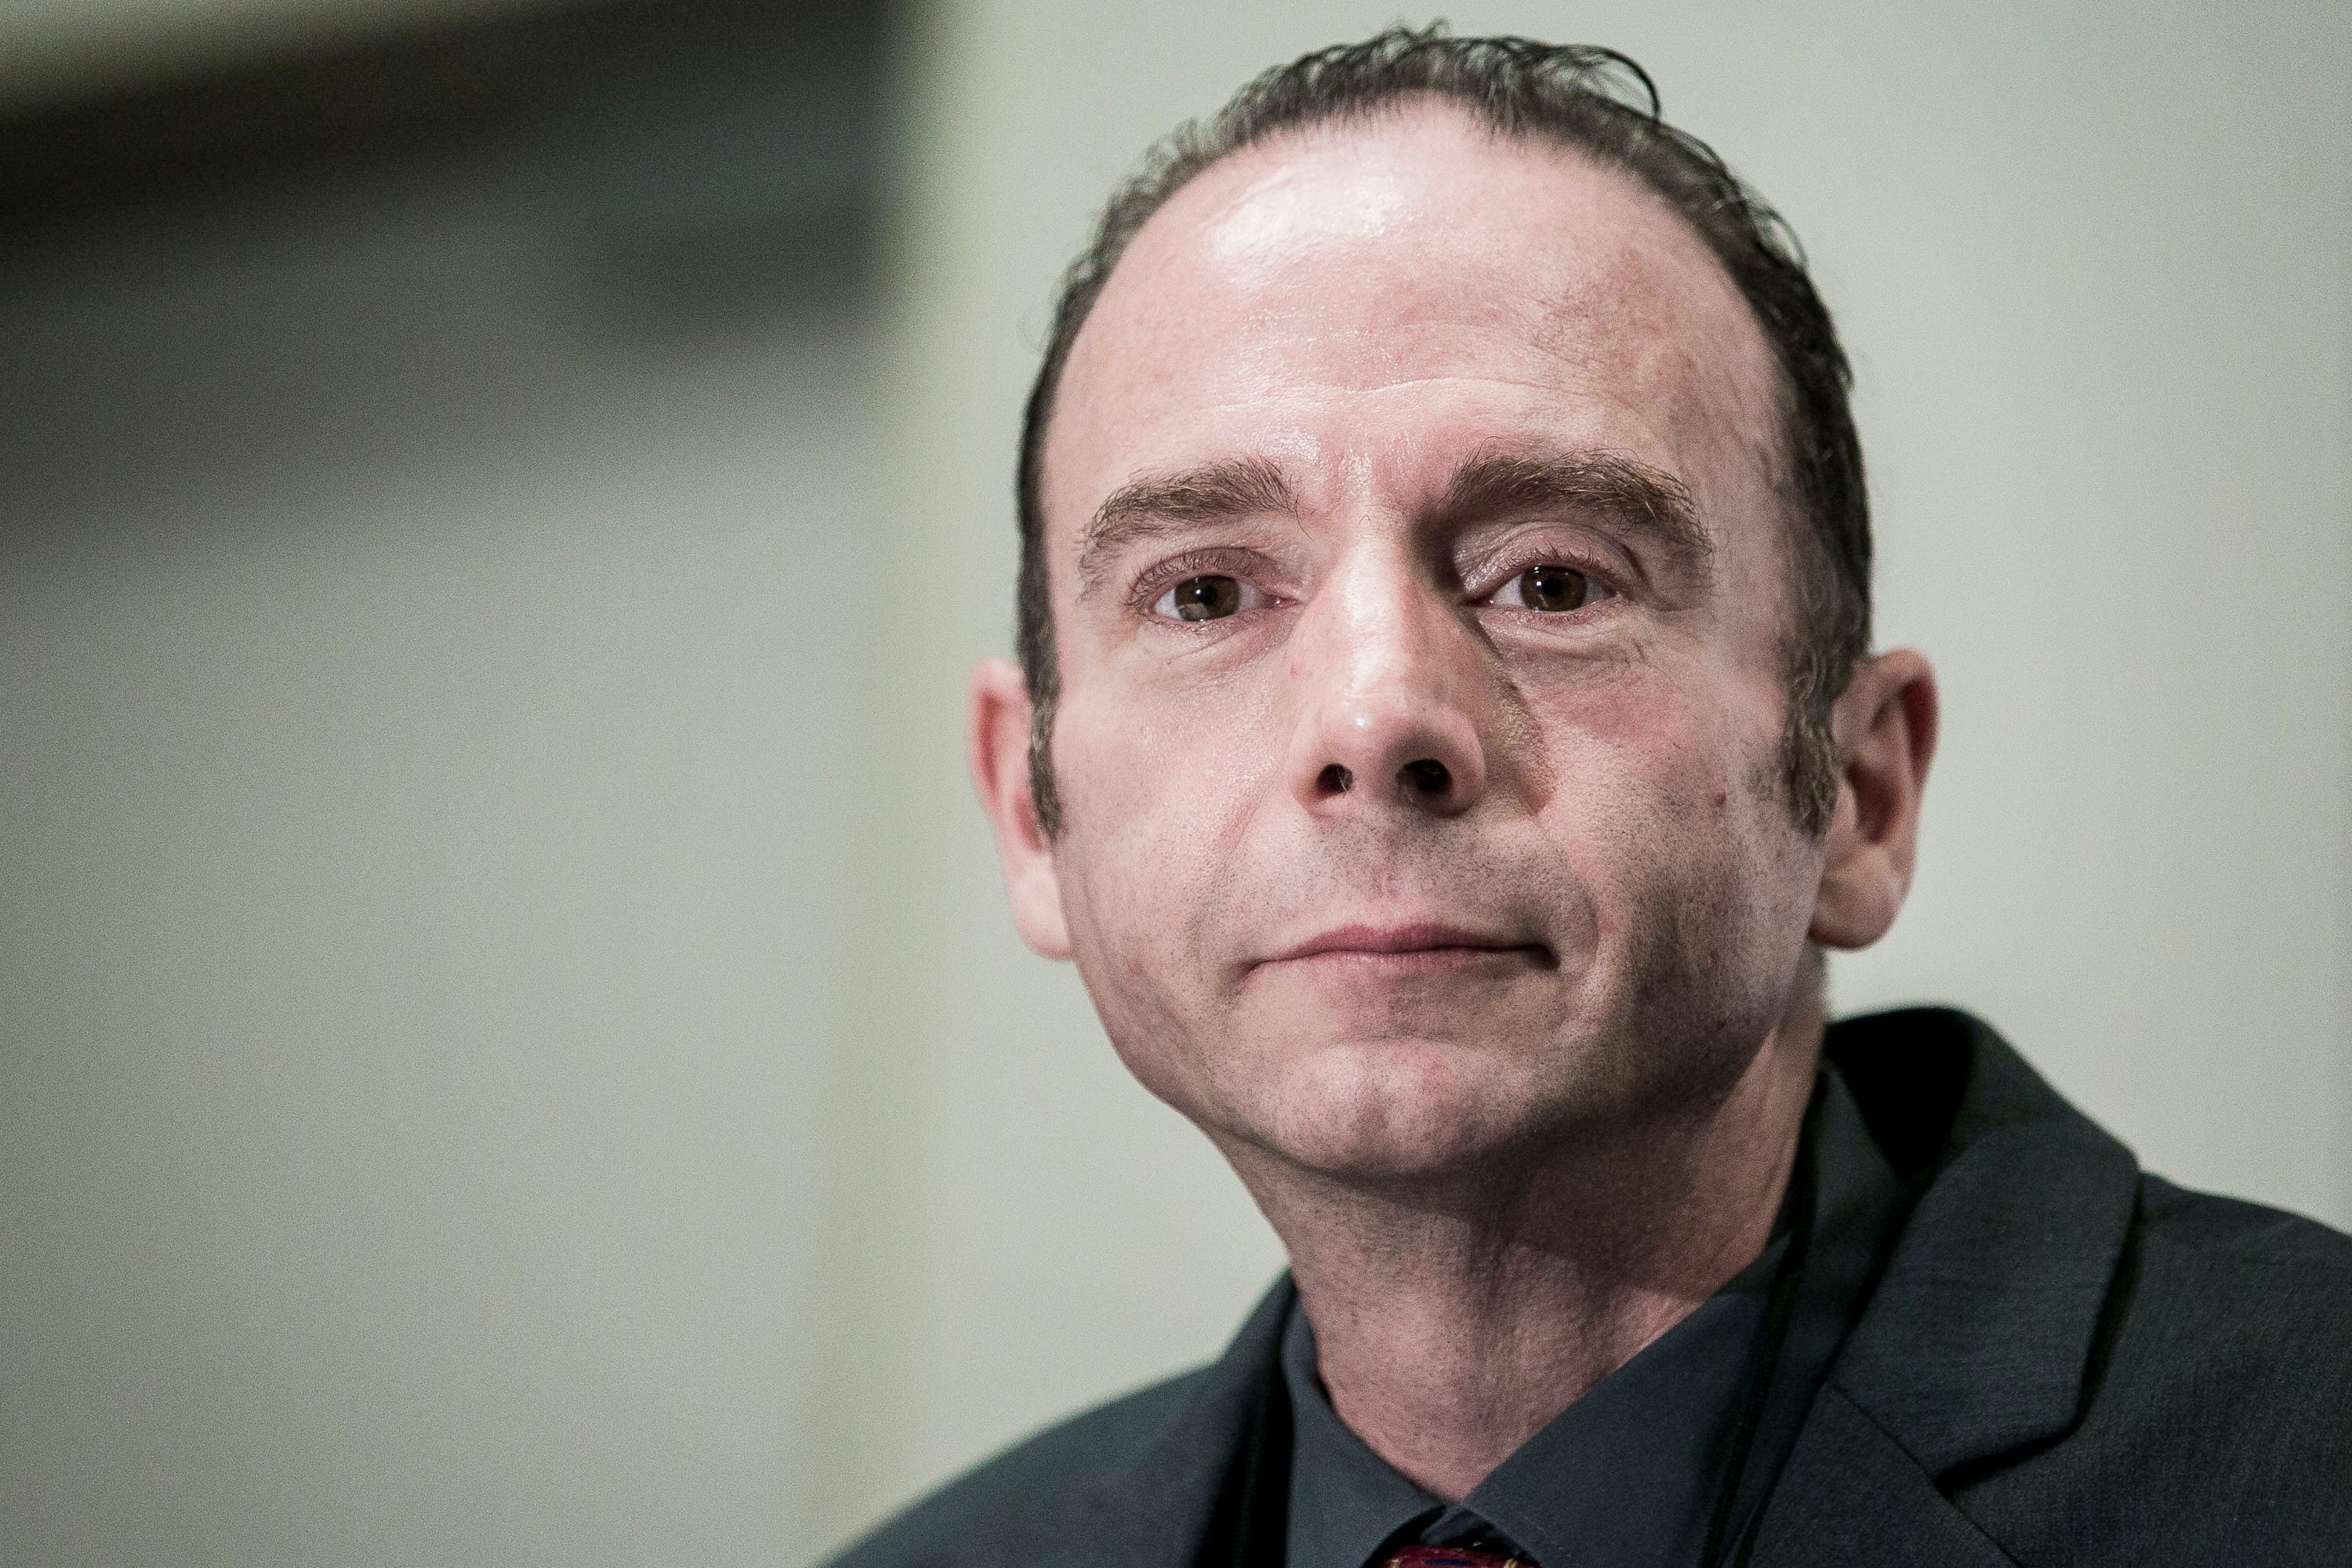 Timothy Ray Brown holds a press conference to announce the launch of the Timothy Ray Brown Foundation on July 24, 2012, in Washington, DC. | Photo: T.J. Kirkpatrick/Getty Images